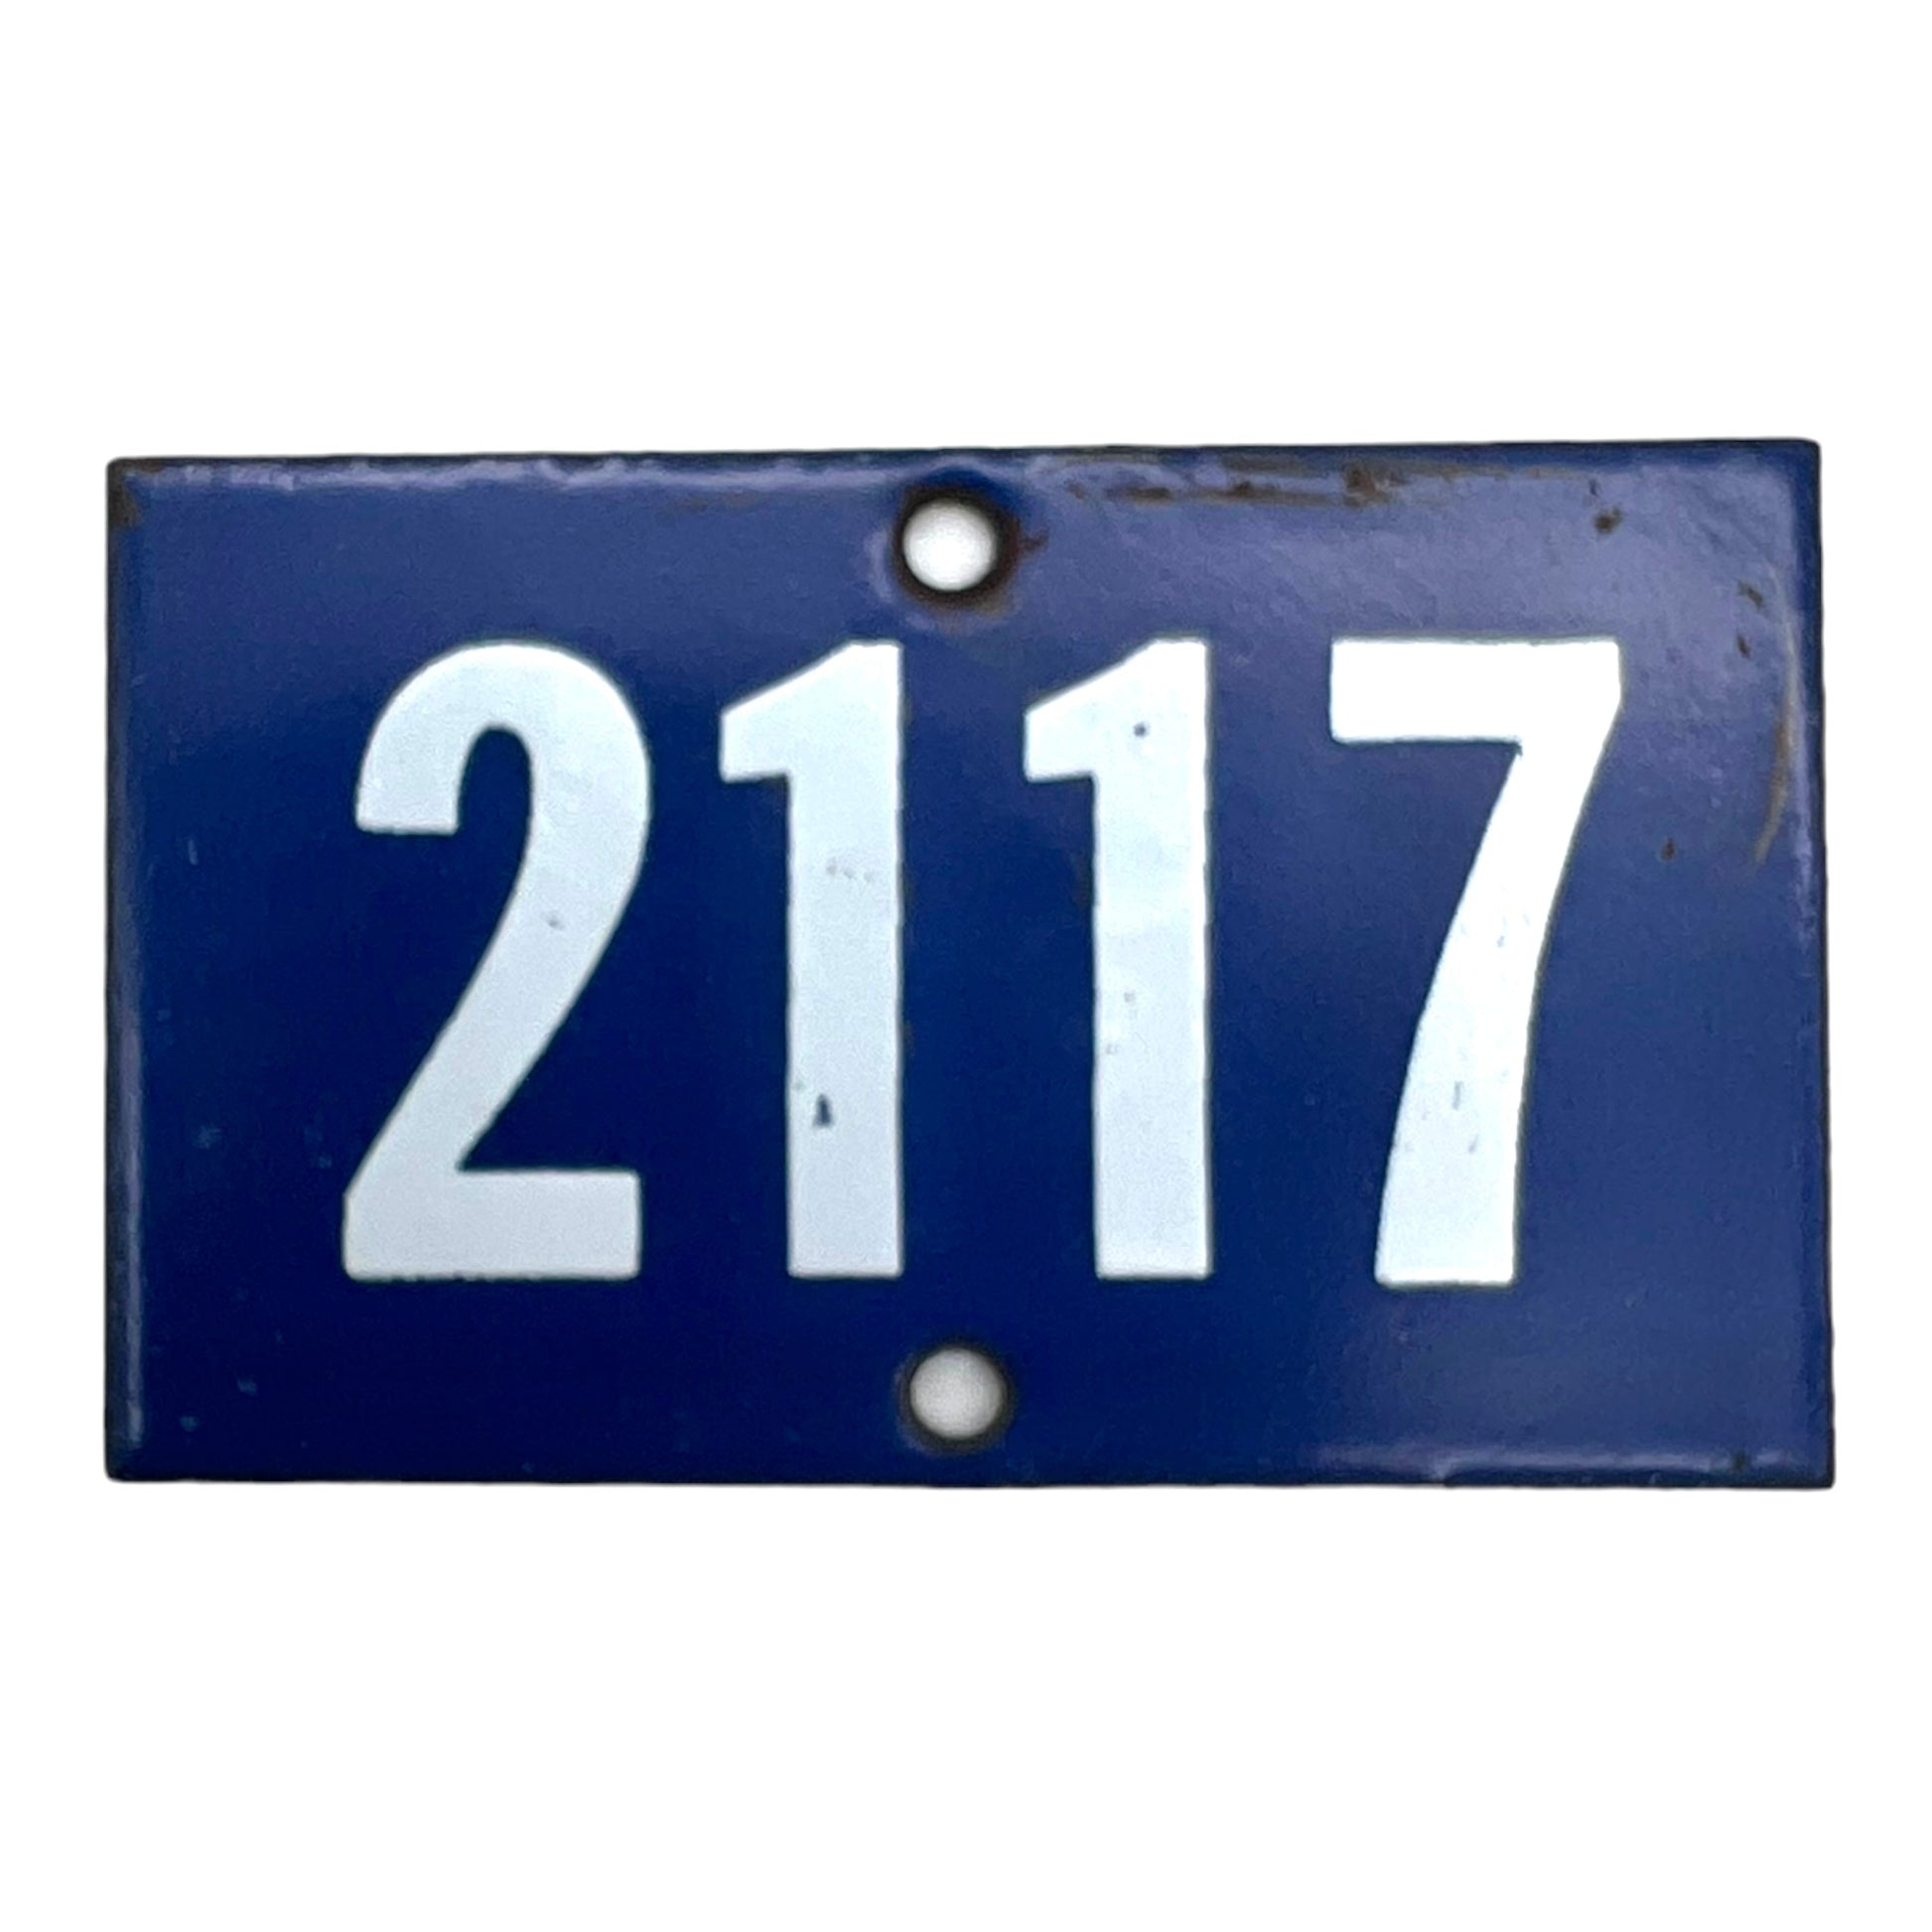 Image of blue enamel house or door number 2117 sold by All Things French Store